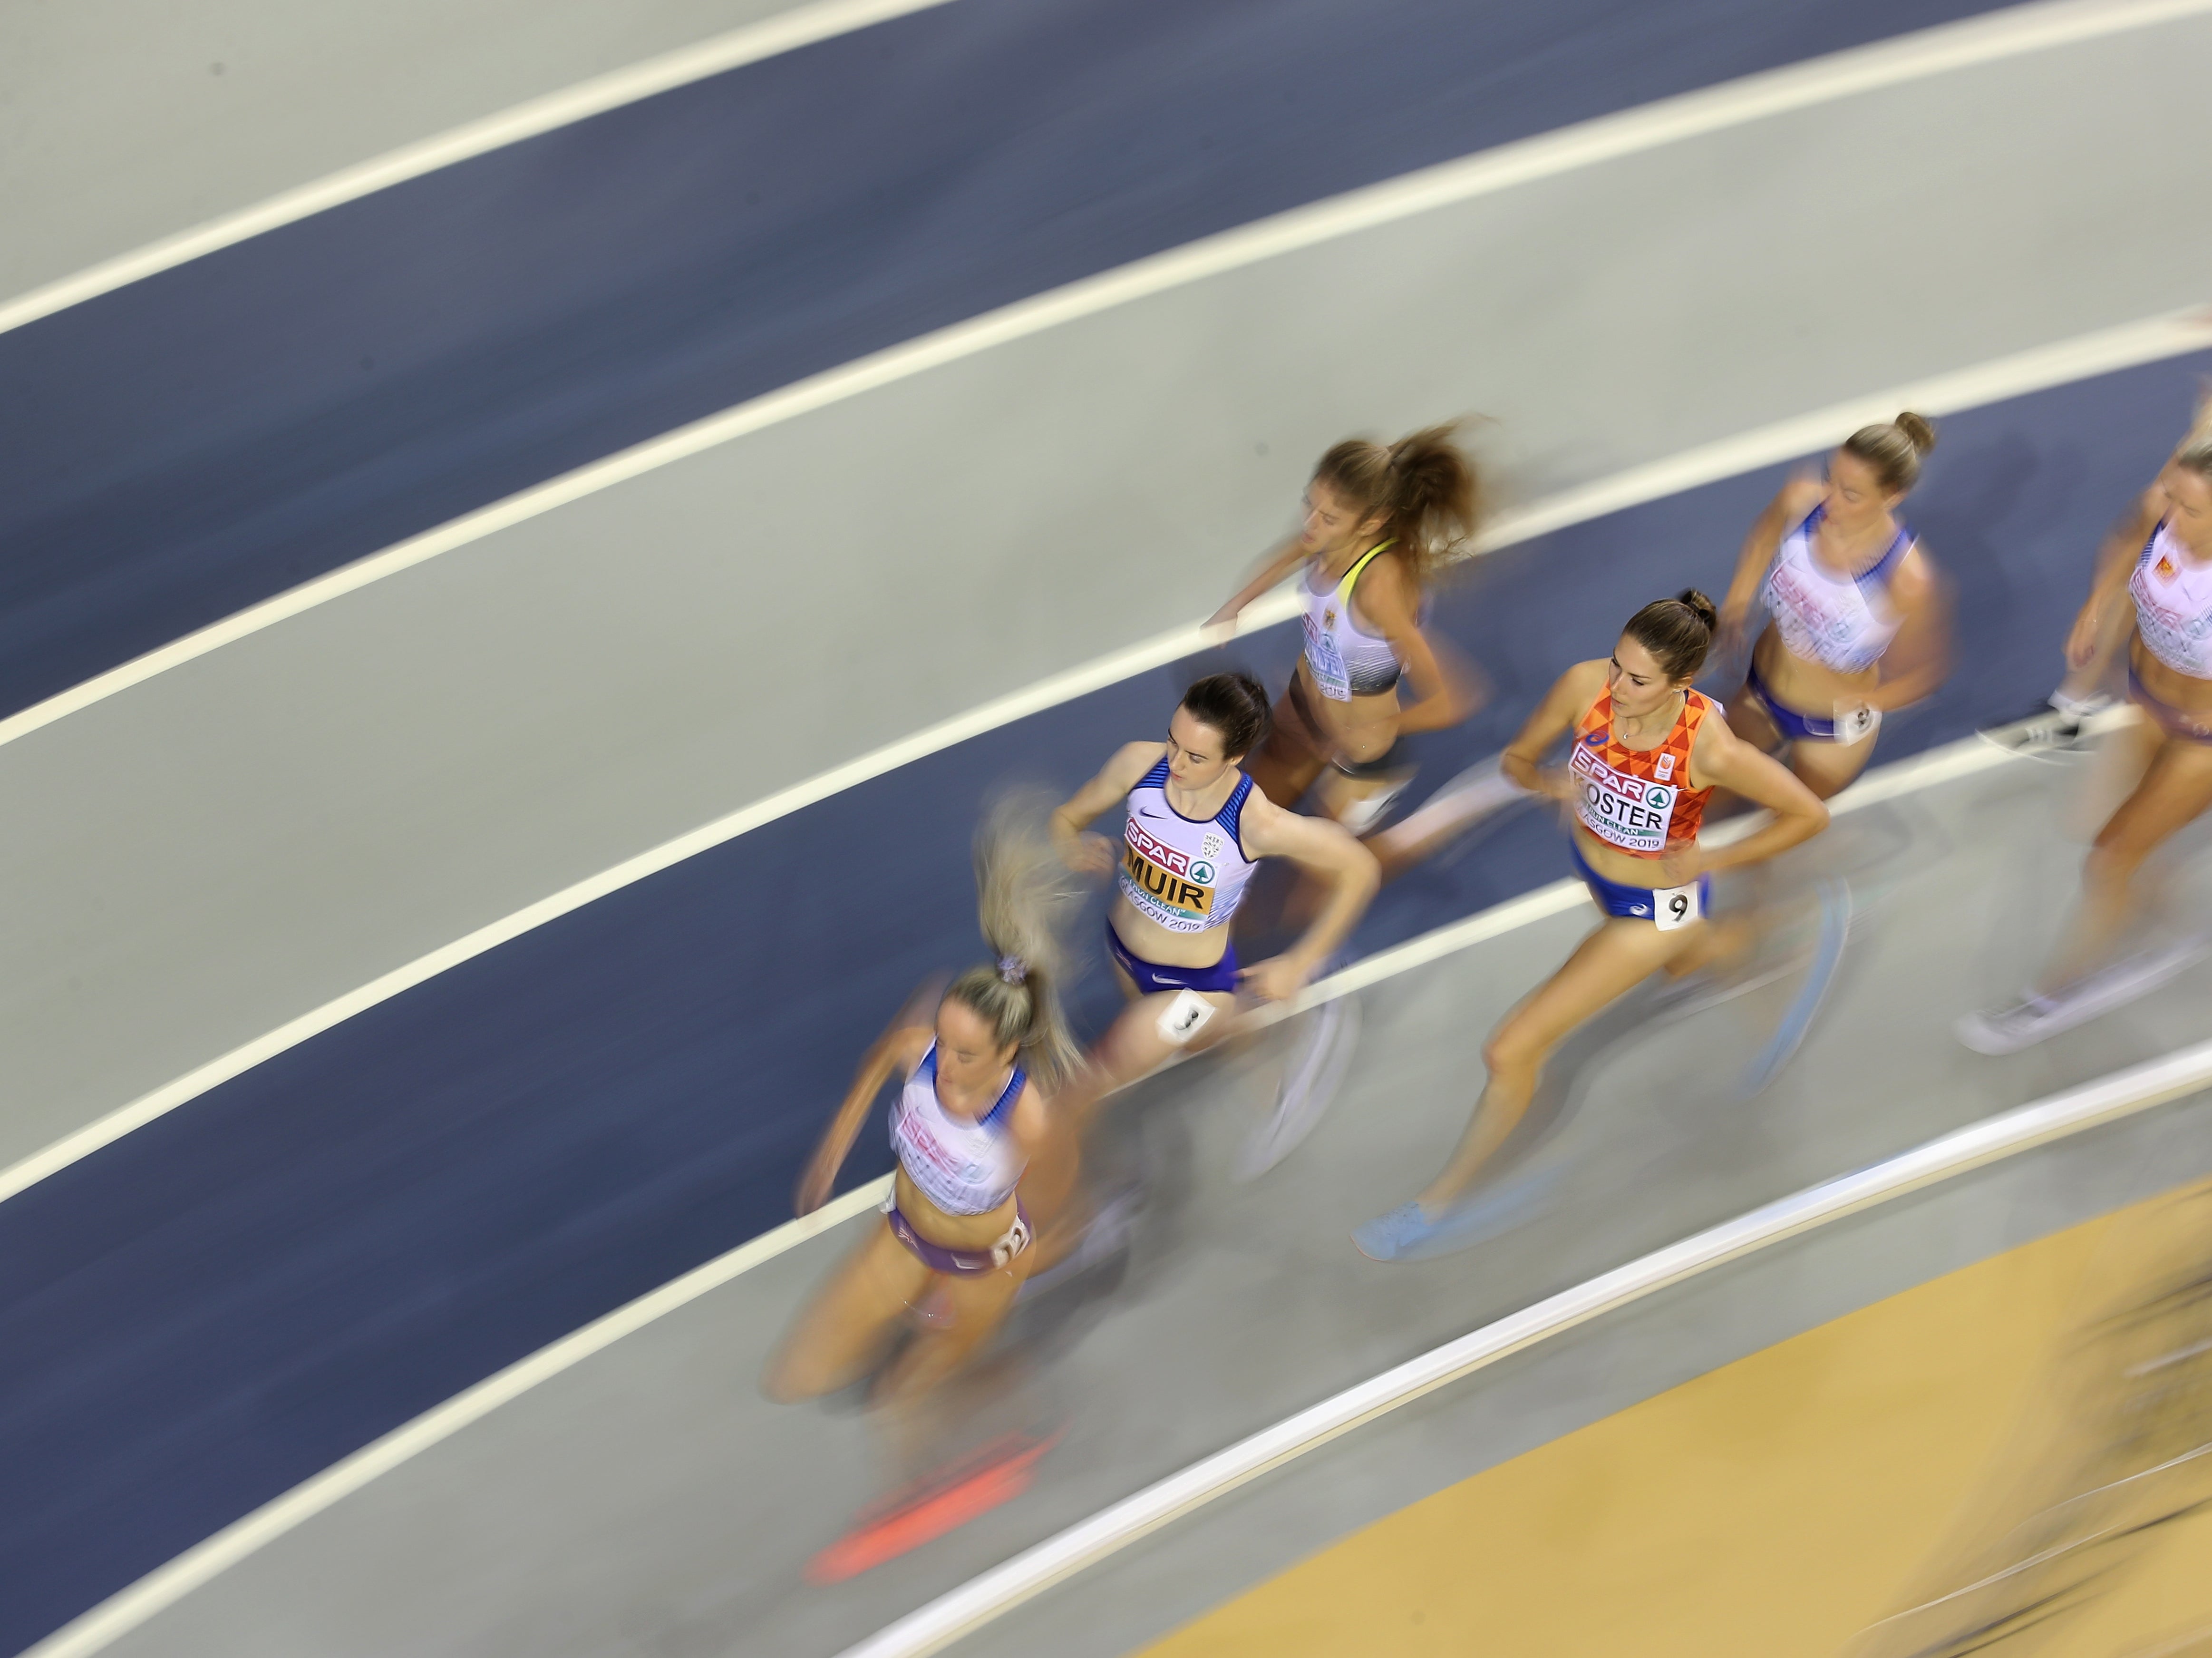 European Indoor Championships schedule, times and how to watch on TV and online The Independent